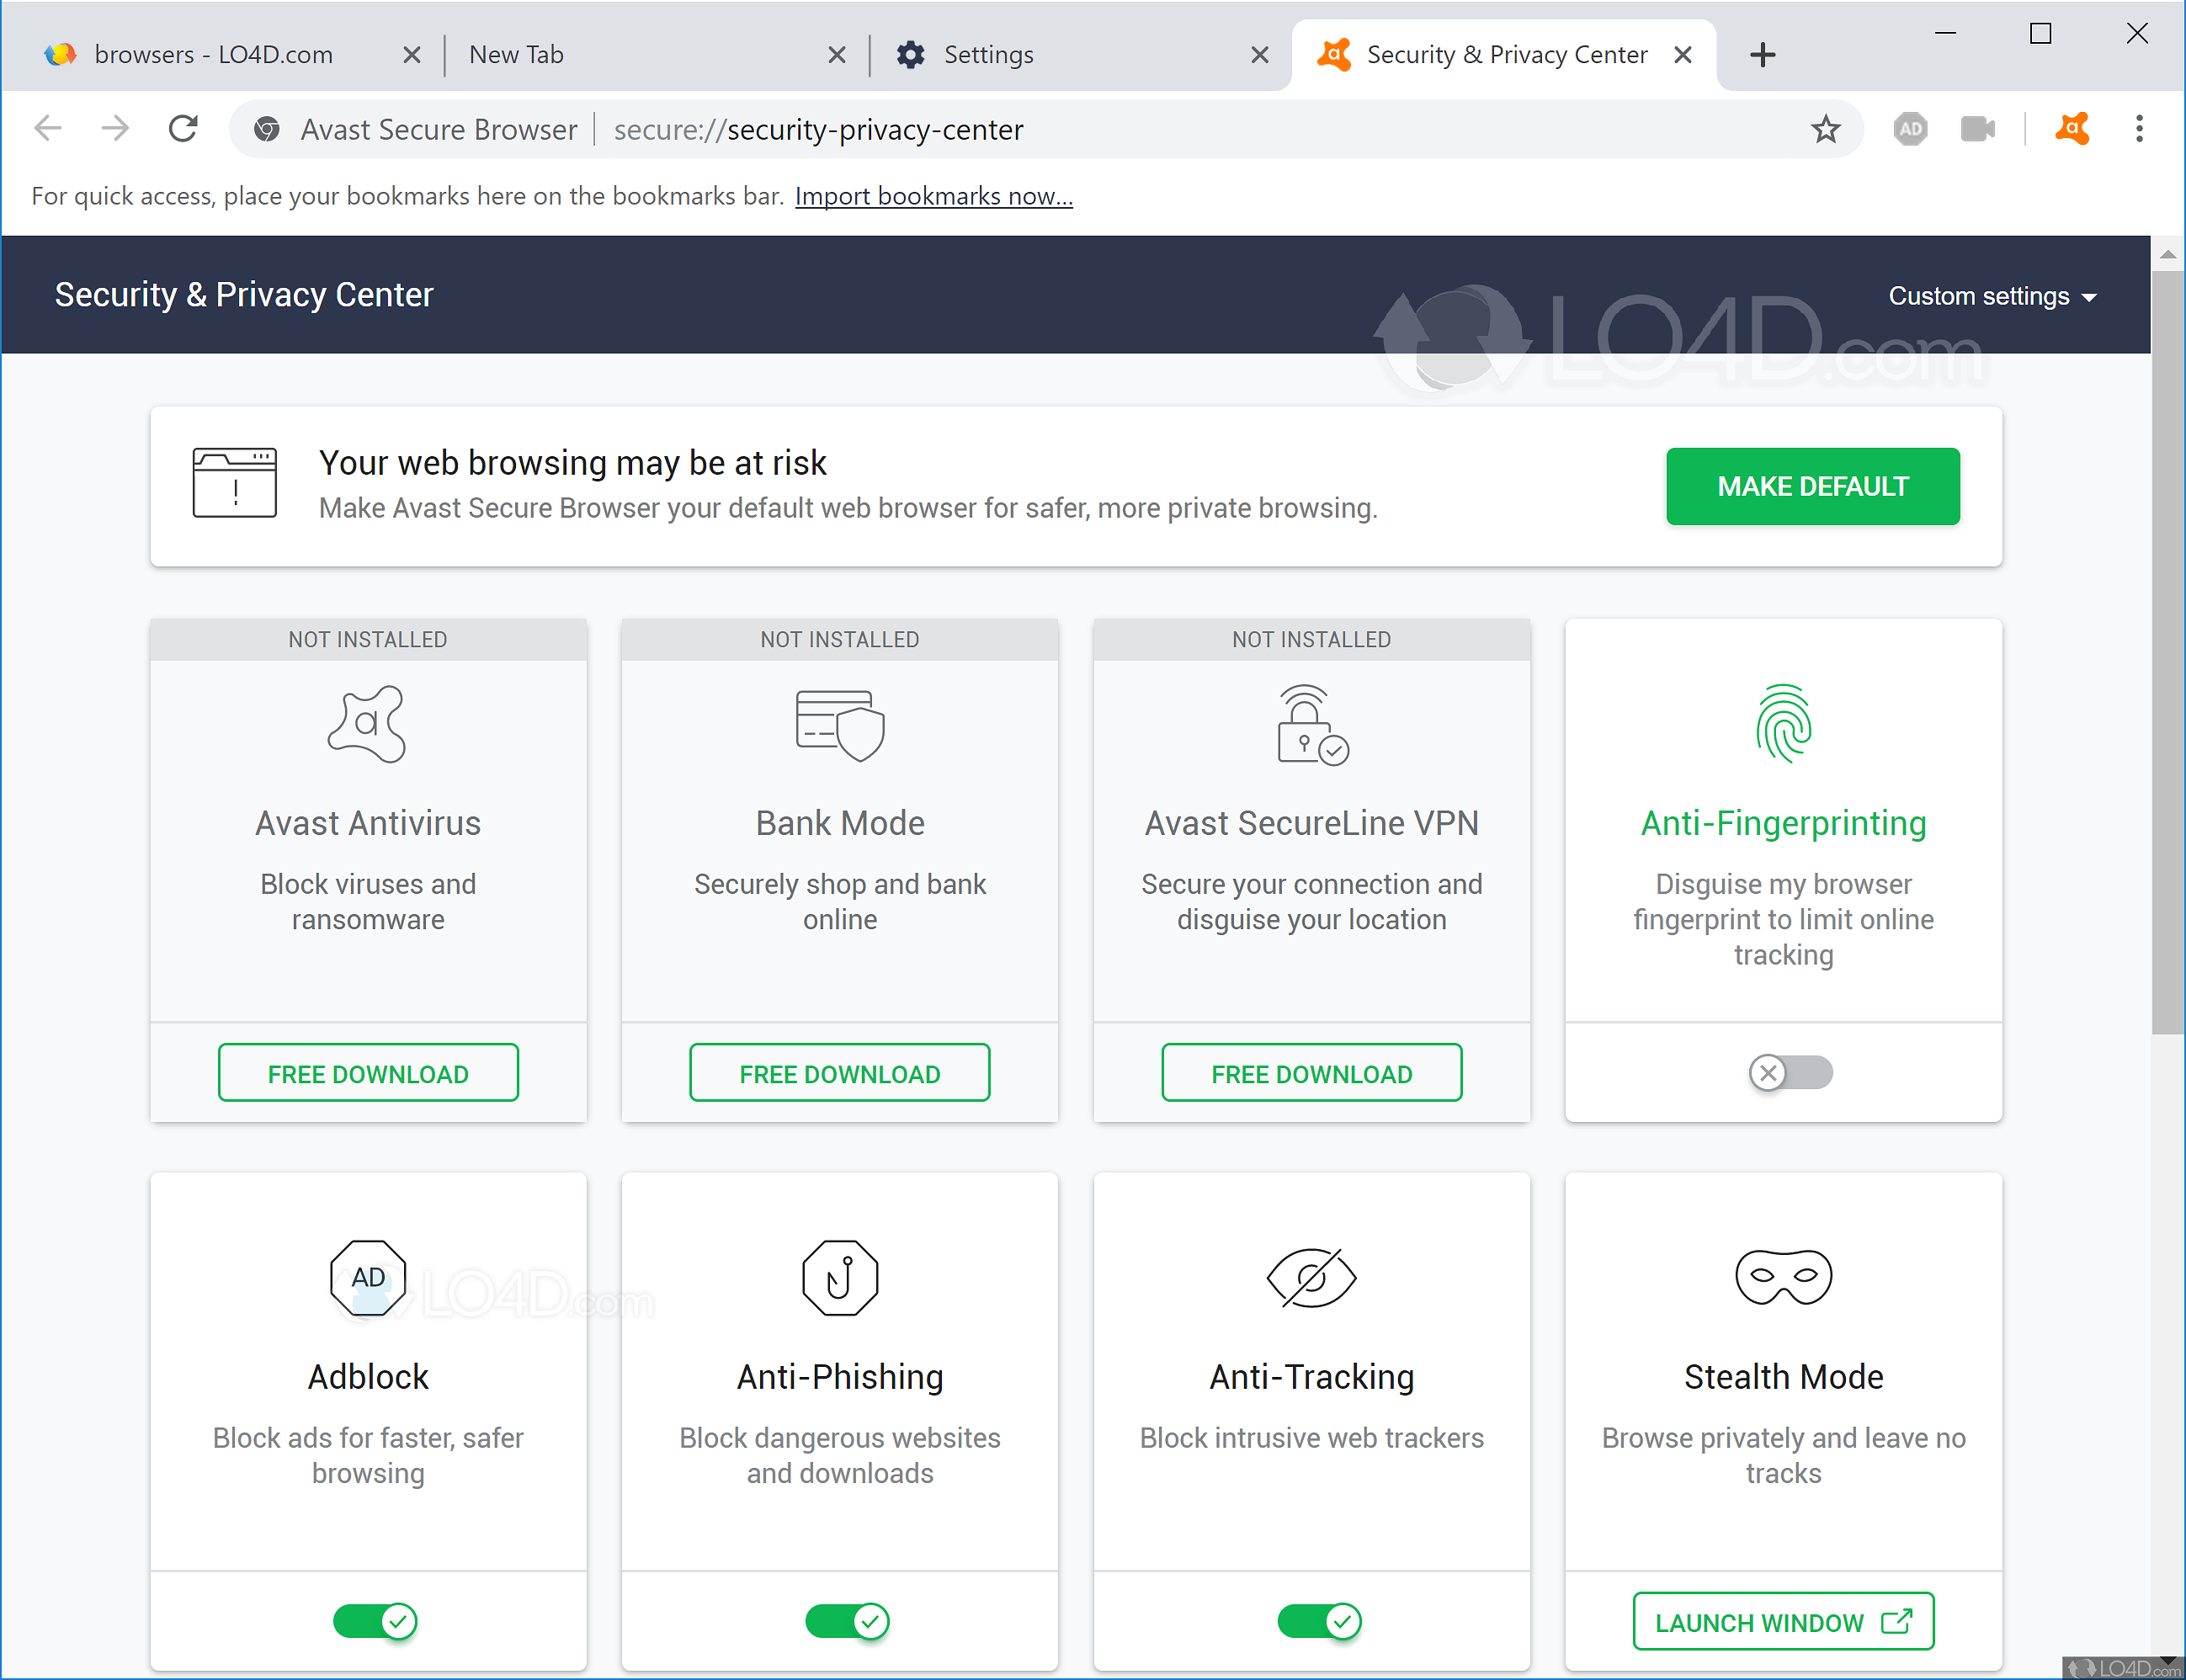 can avast secure browser download videos